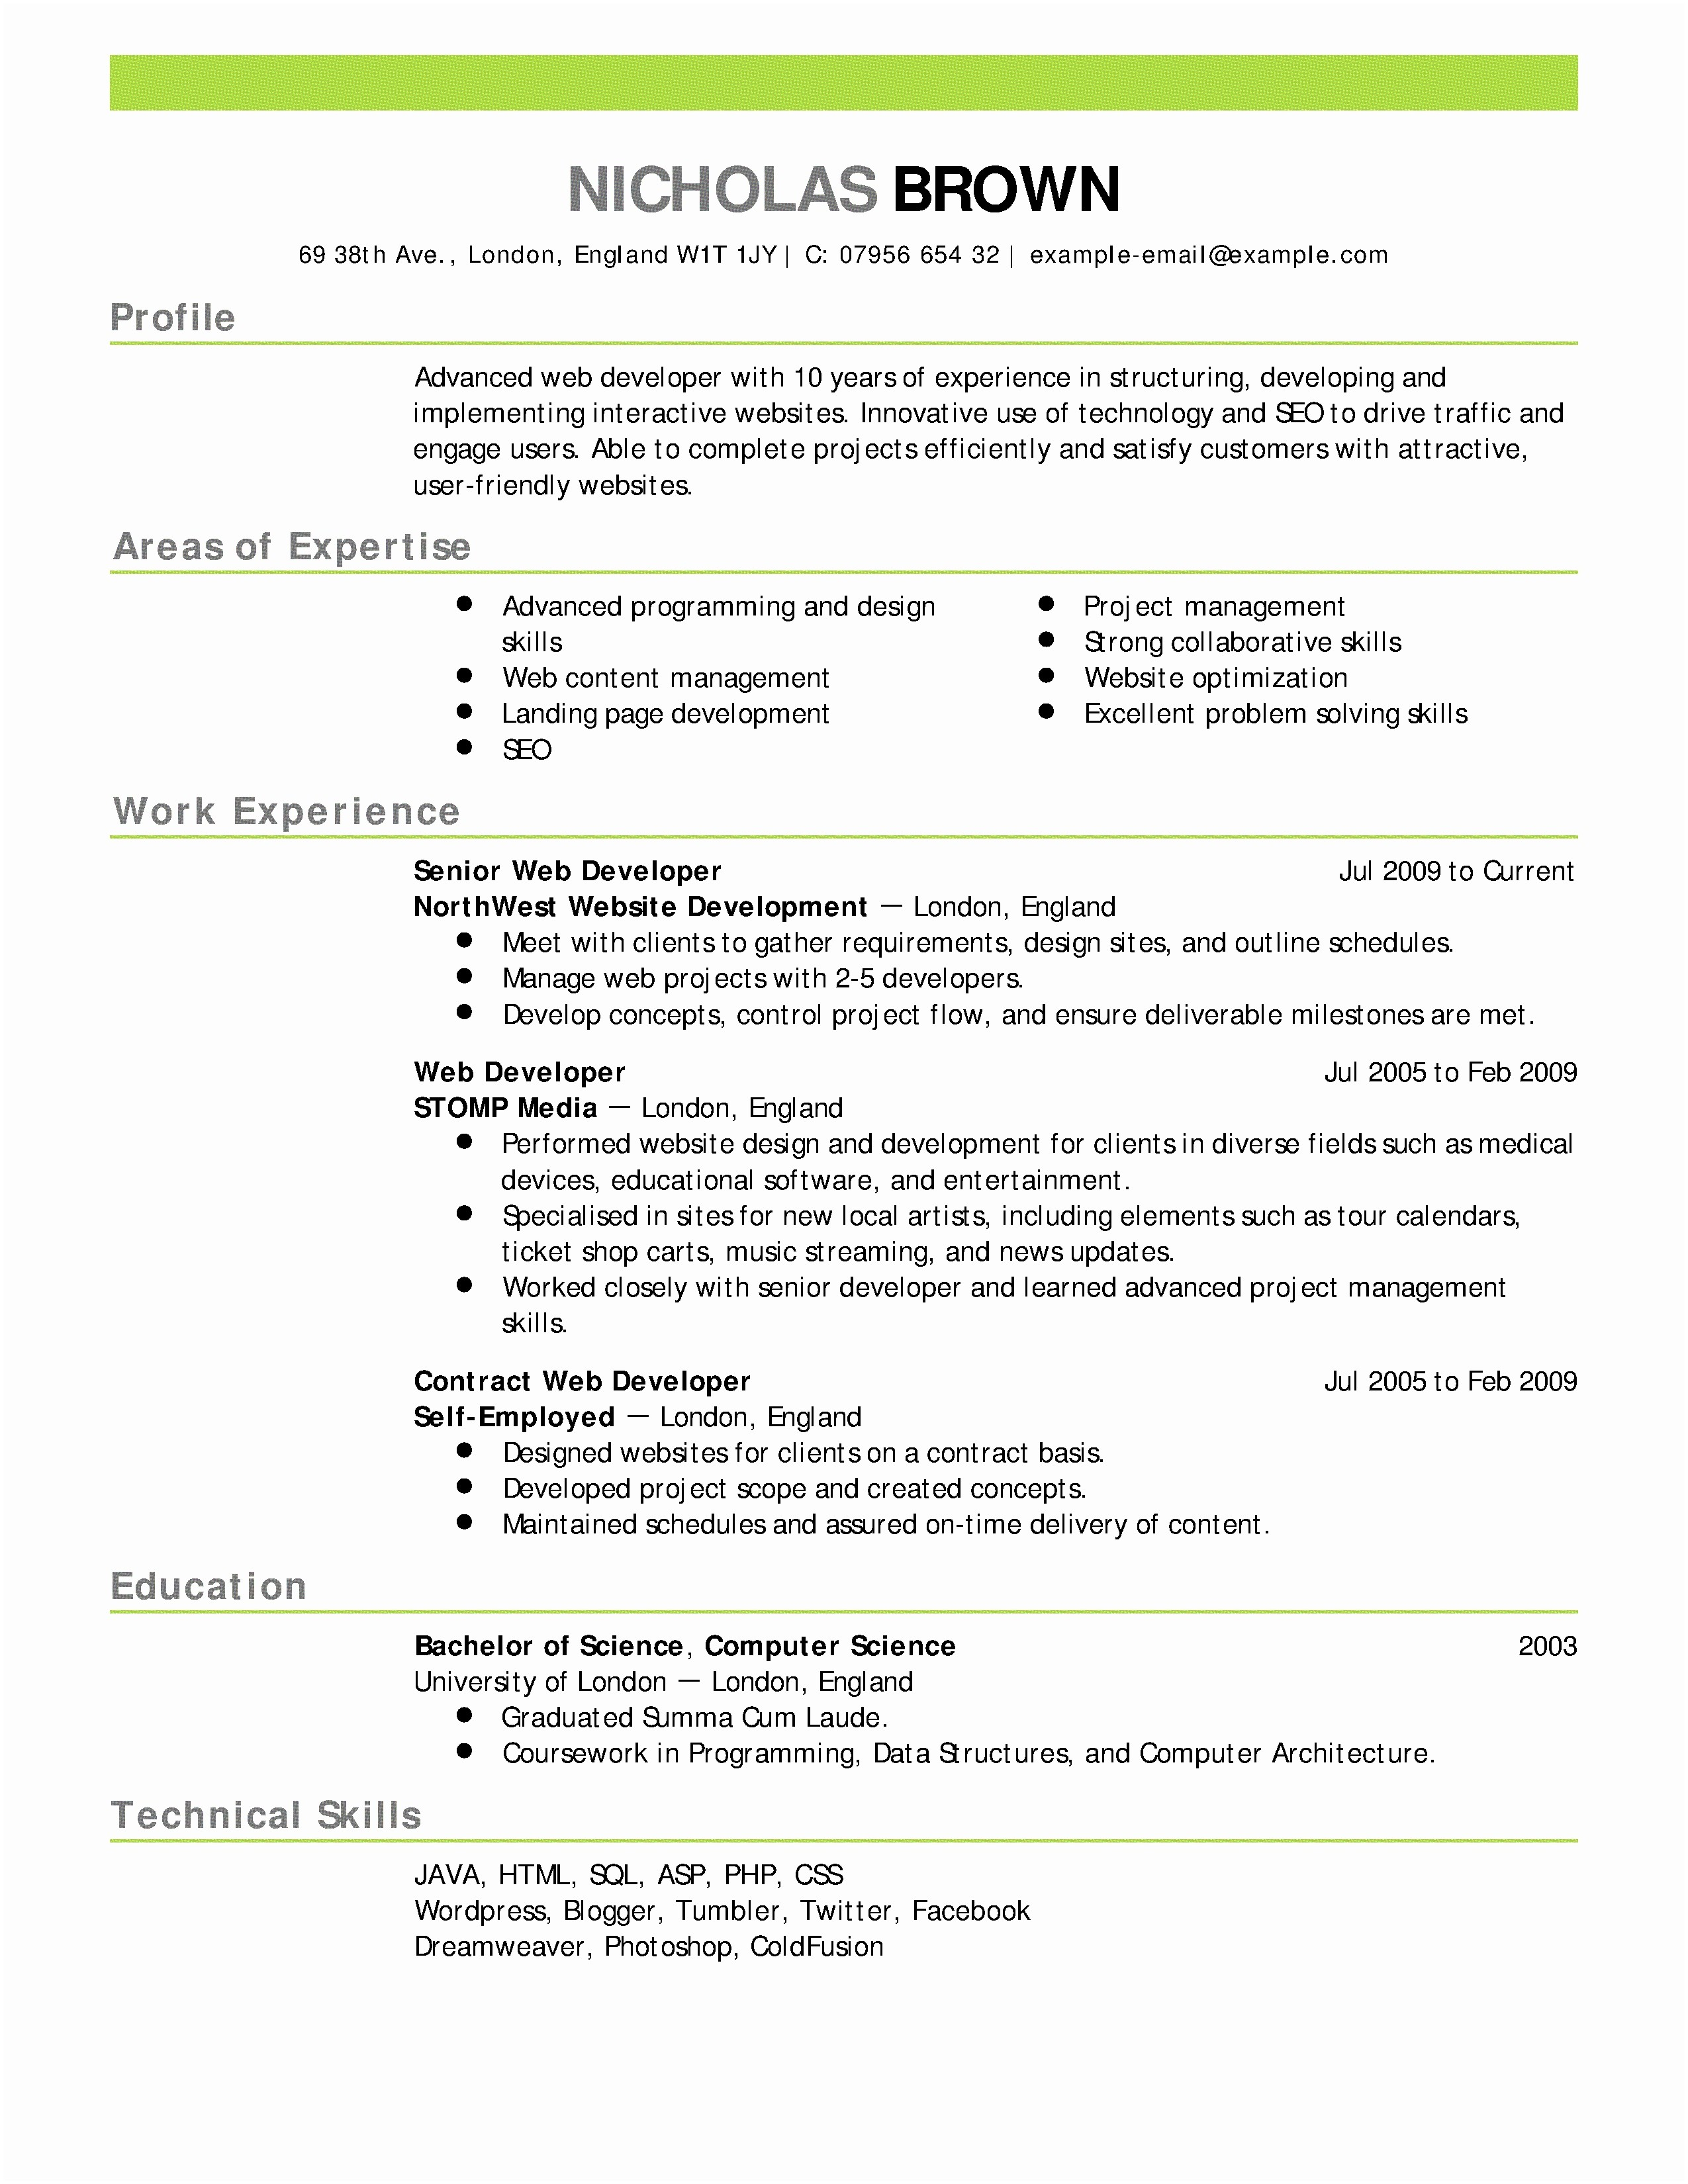 Petition Letter Template - Nursing Resume Samples New Professional Job Resume Template Od Cover